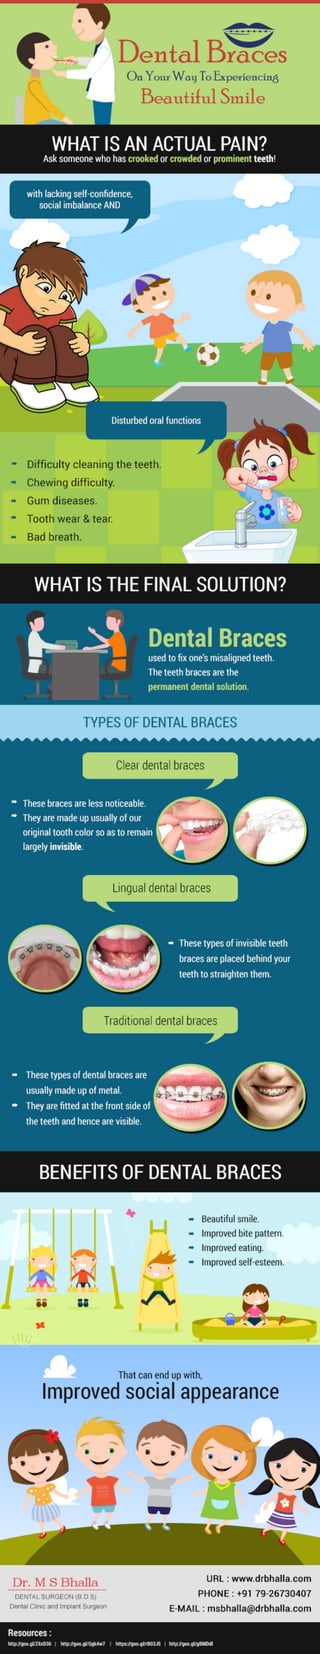 Dental Braces On Your Way To Experiencing Beautiful Smile